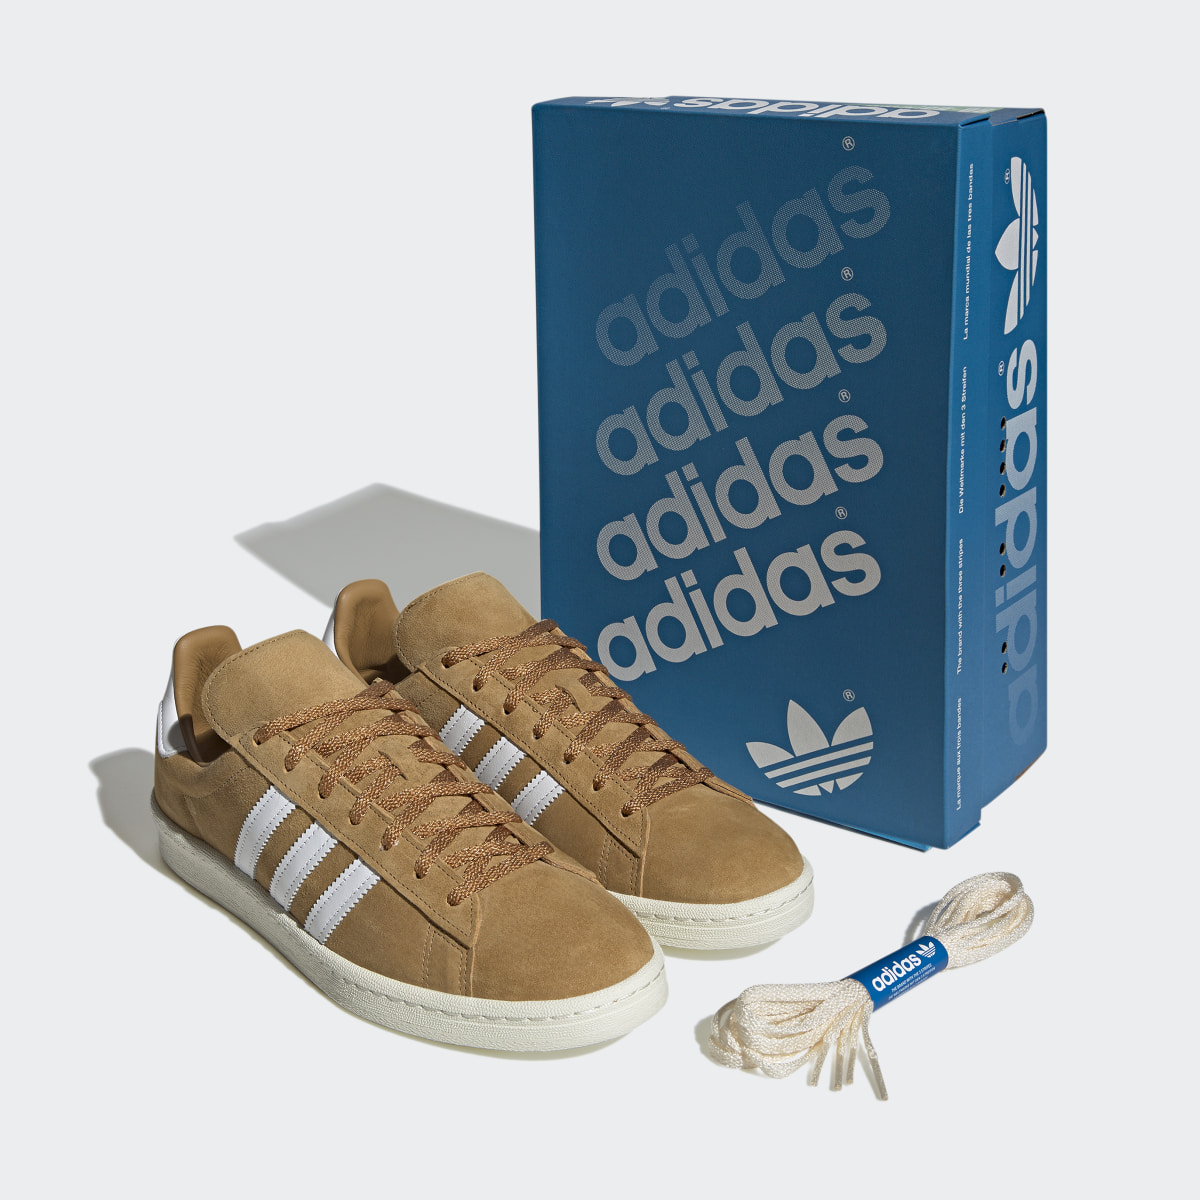 Adidas Campus 80s Shoes. 10